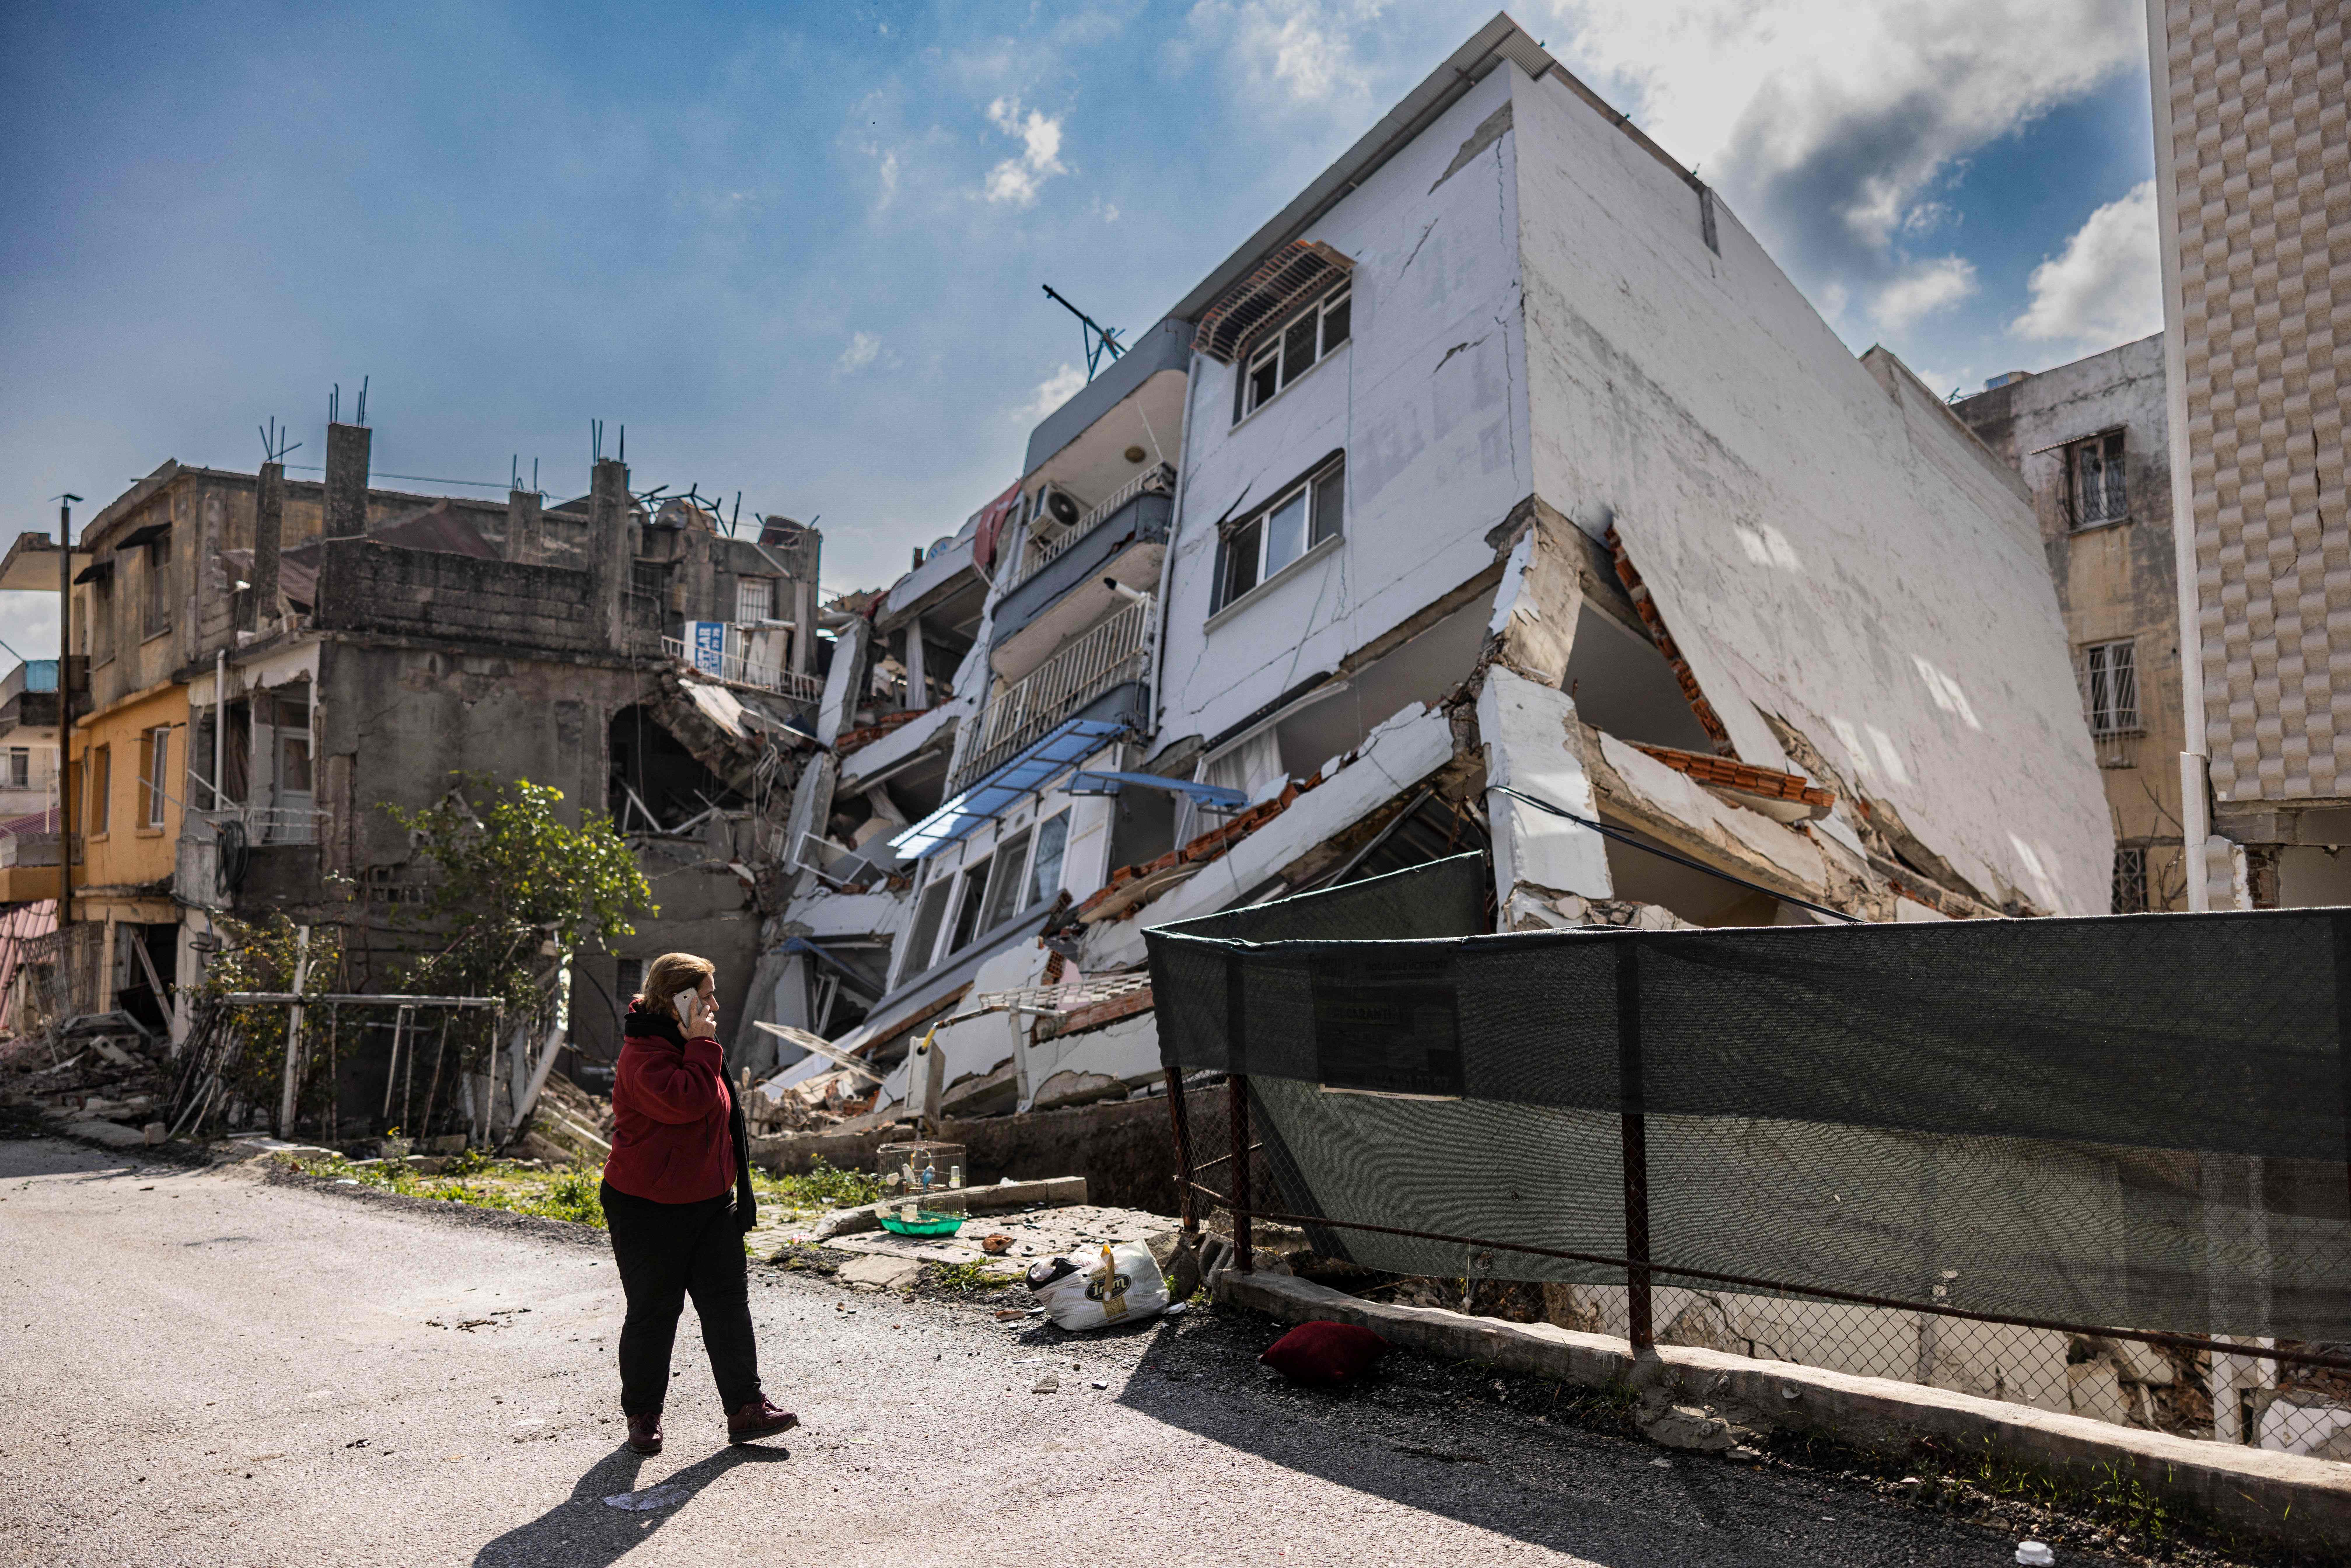 Android's earthquake warning system failed in Turkey, according to the BBC